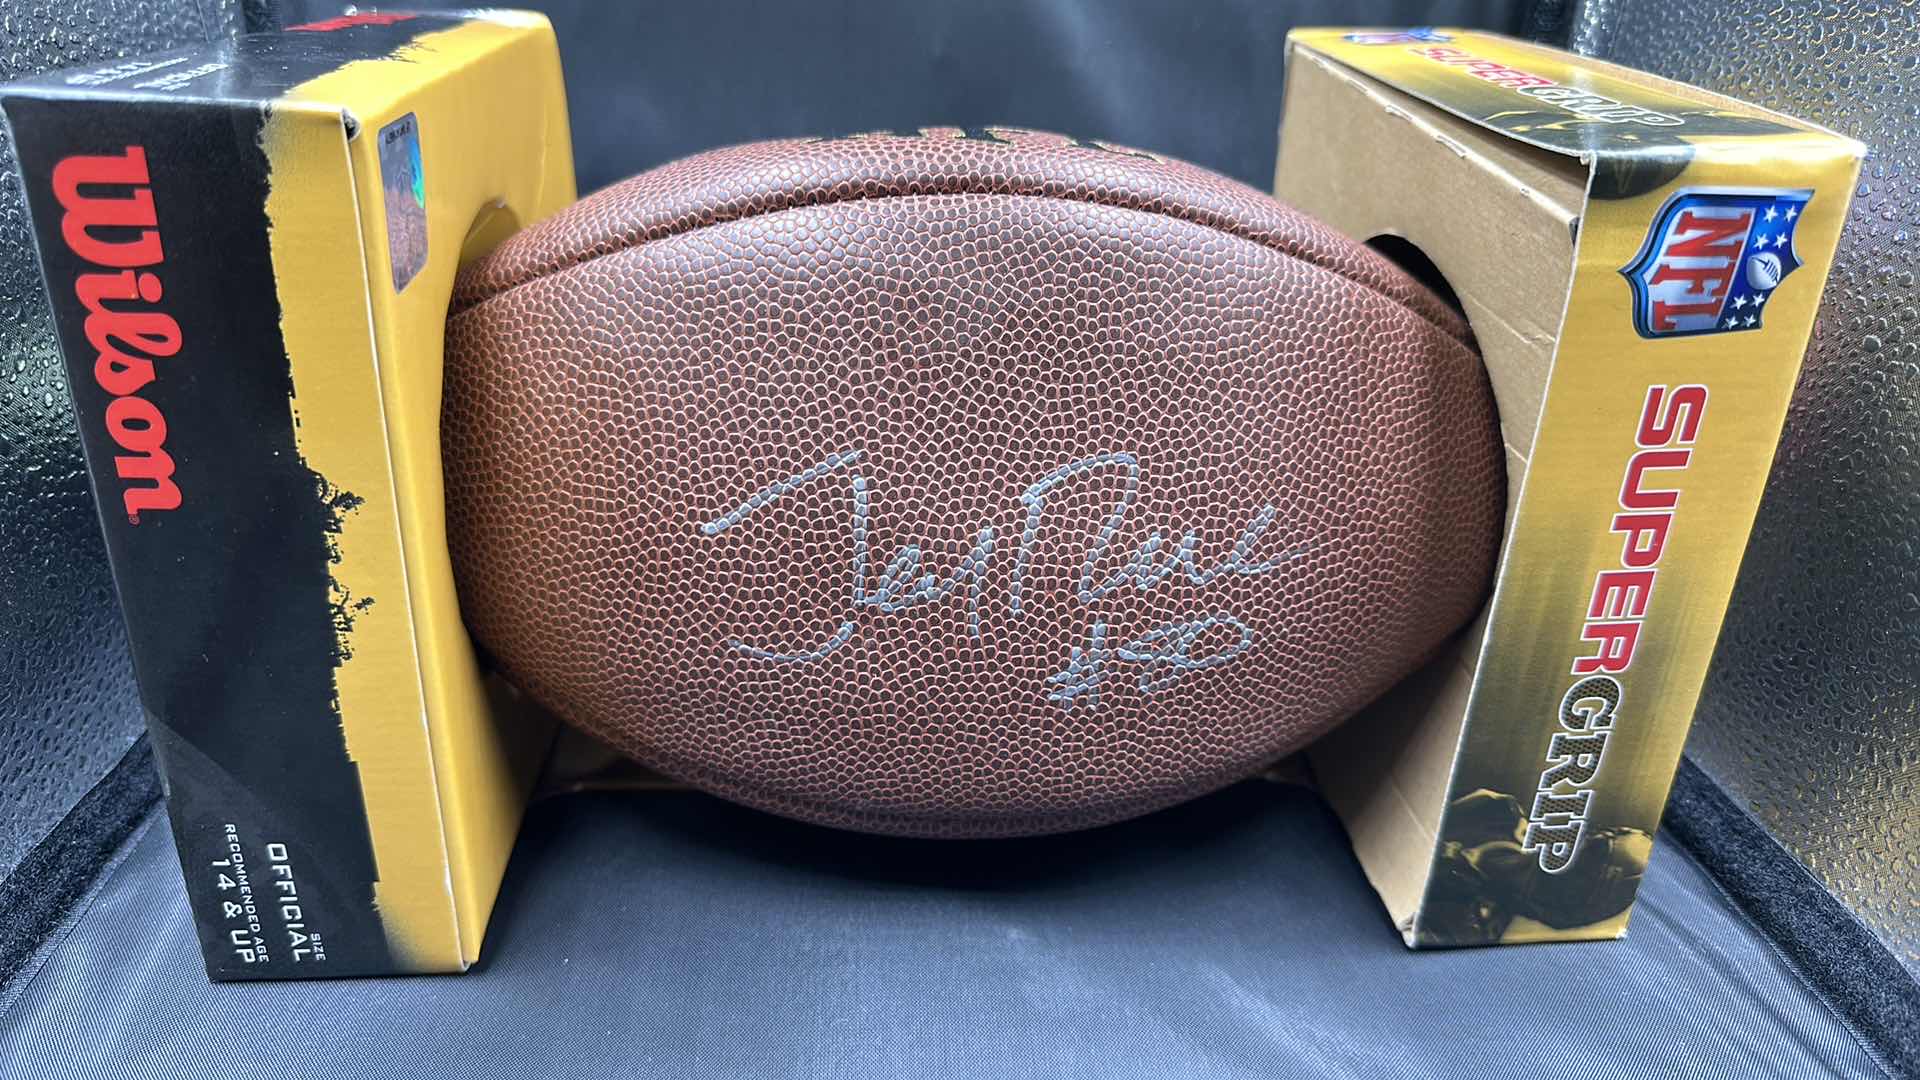 Photo 1 of JERRY RICE AUTOGRAPHED FOOTBALL AUTHENTICITY VERIFIED BY SELLER